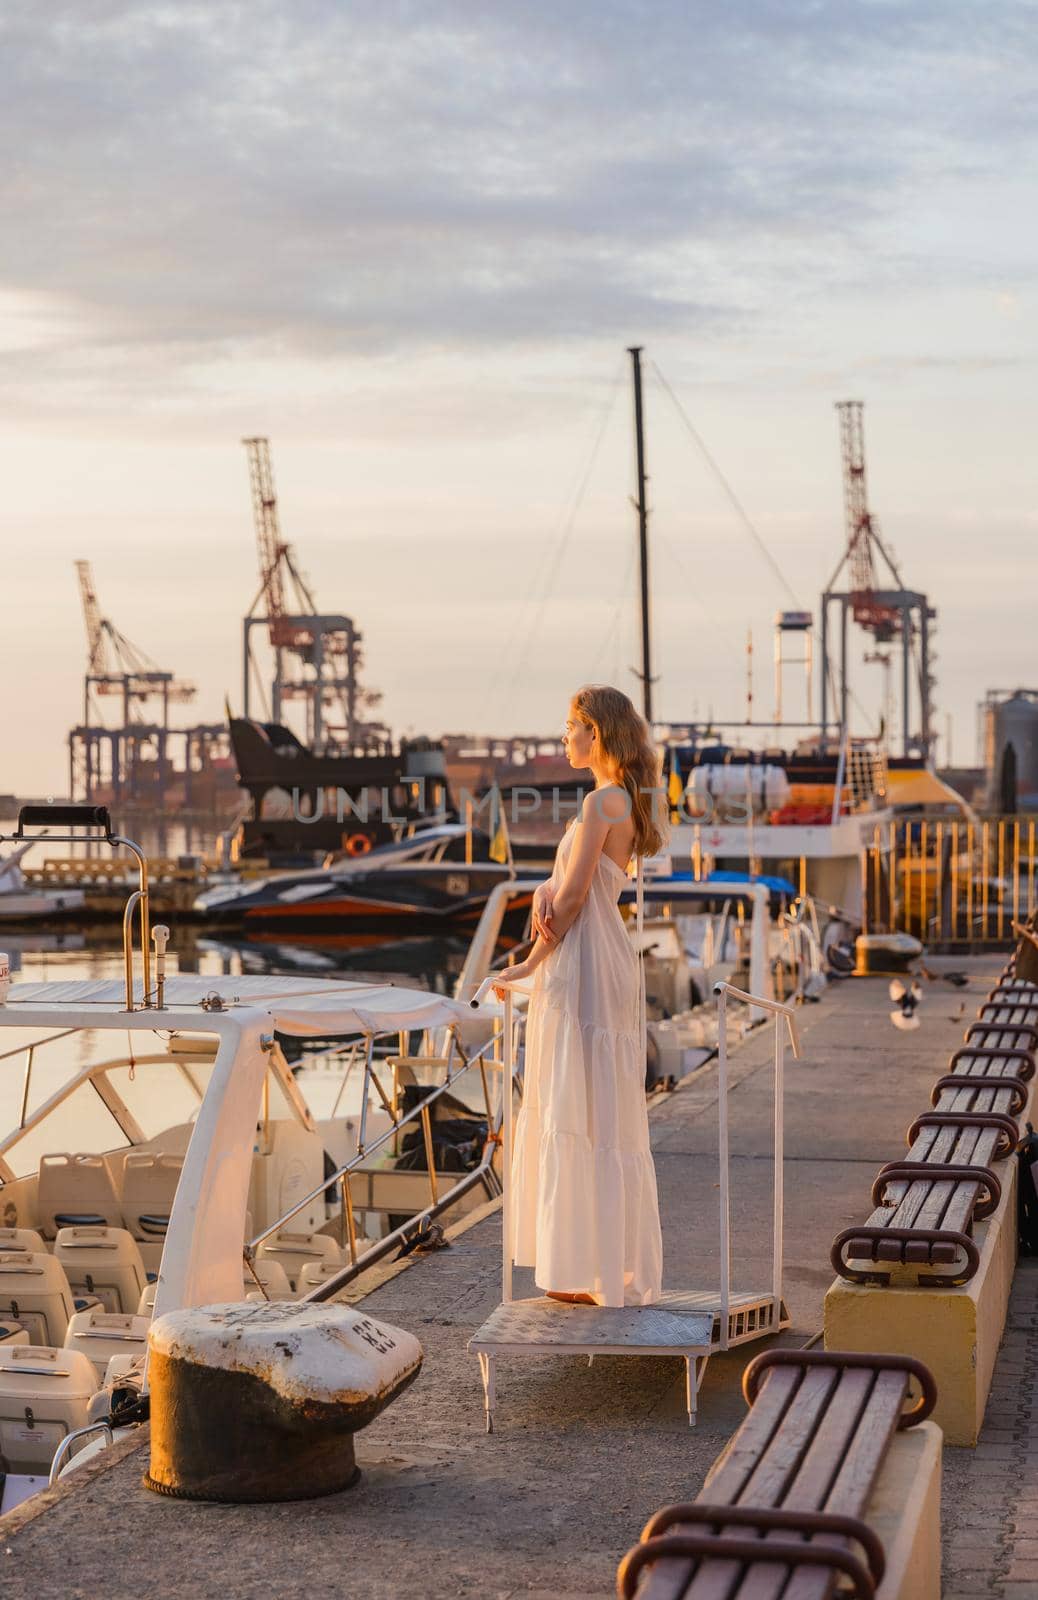 a girl in a white dress stands on the pier against the background of the sea